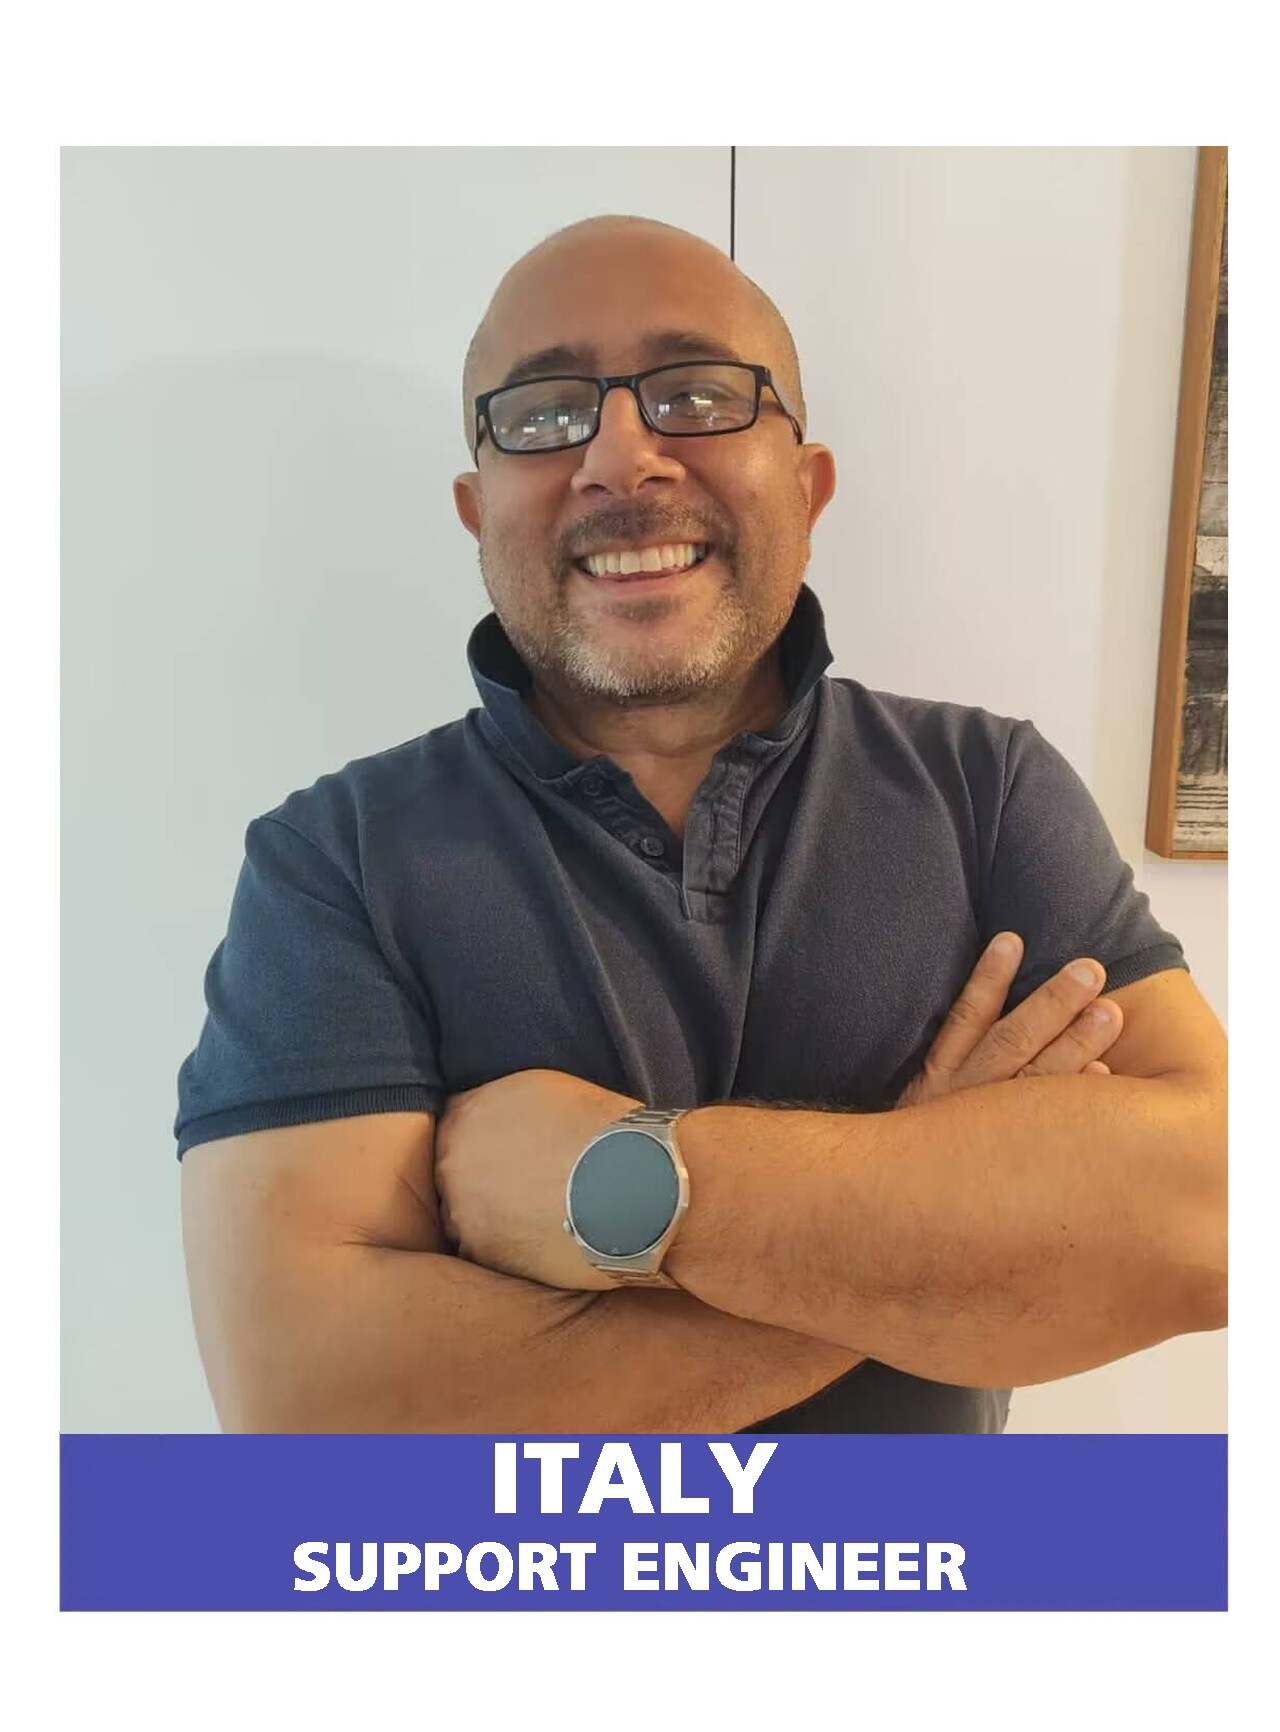 Italy support engineer